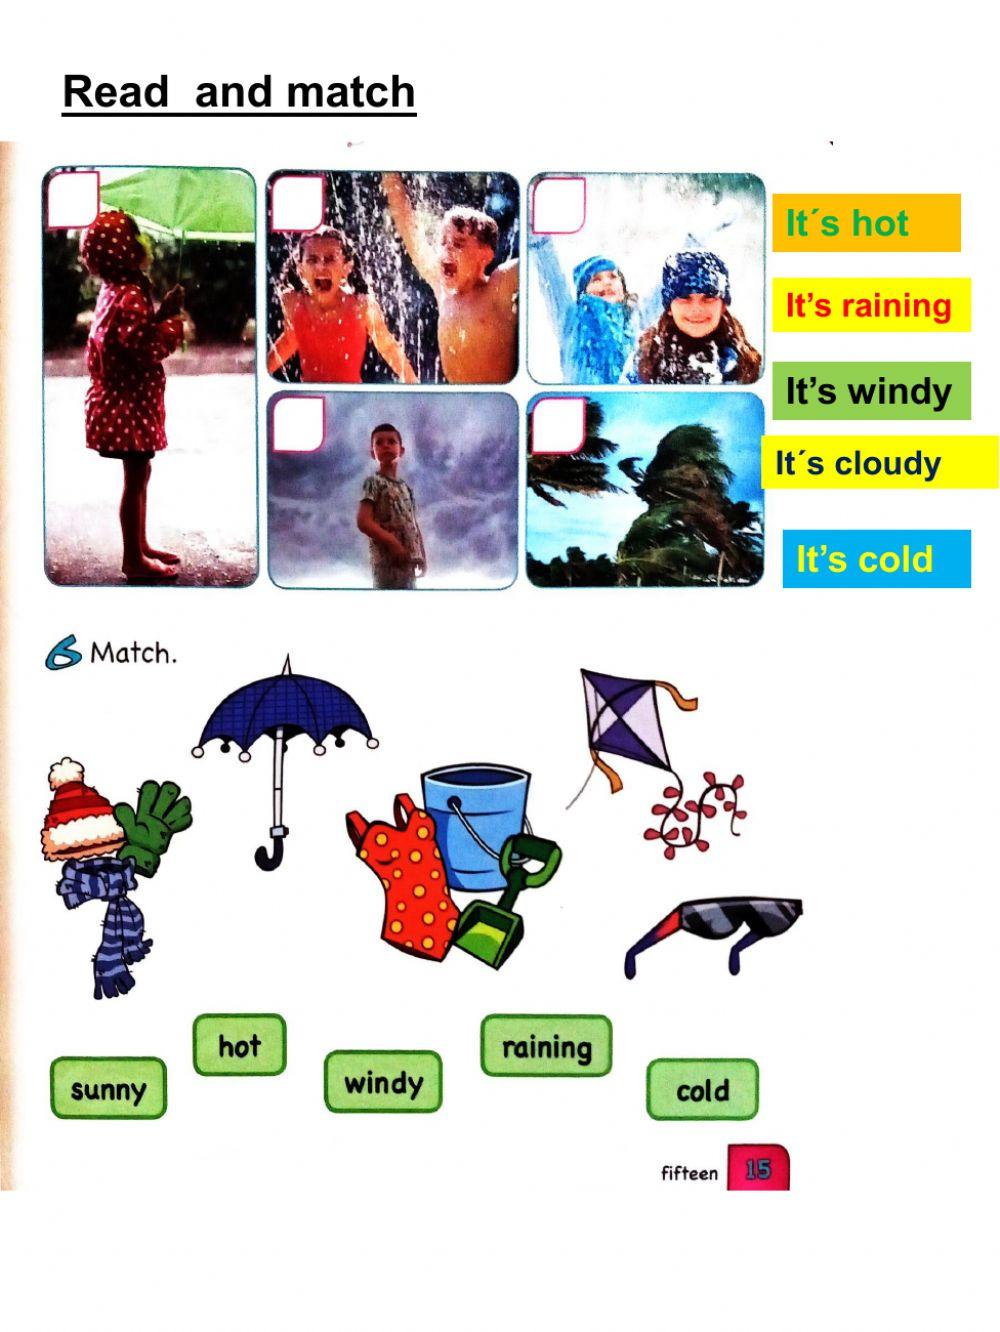 The weather and seasons